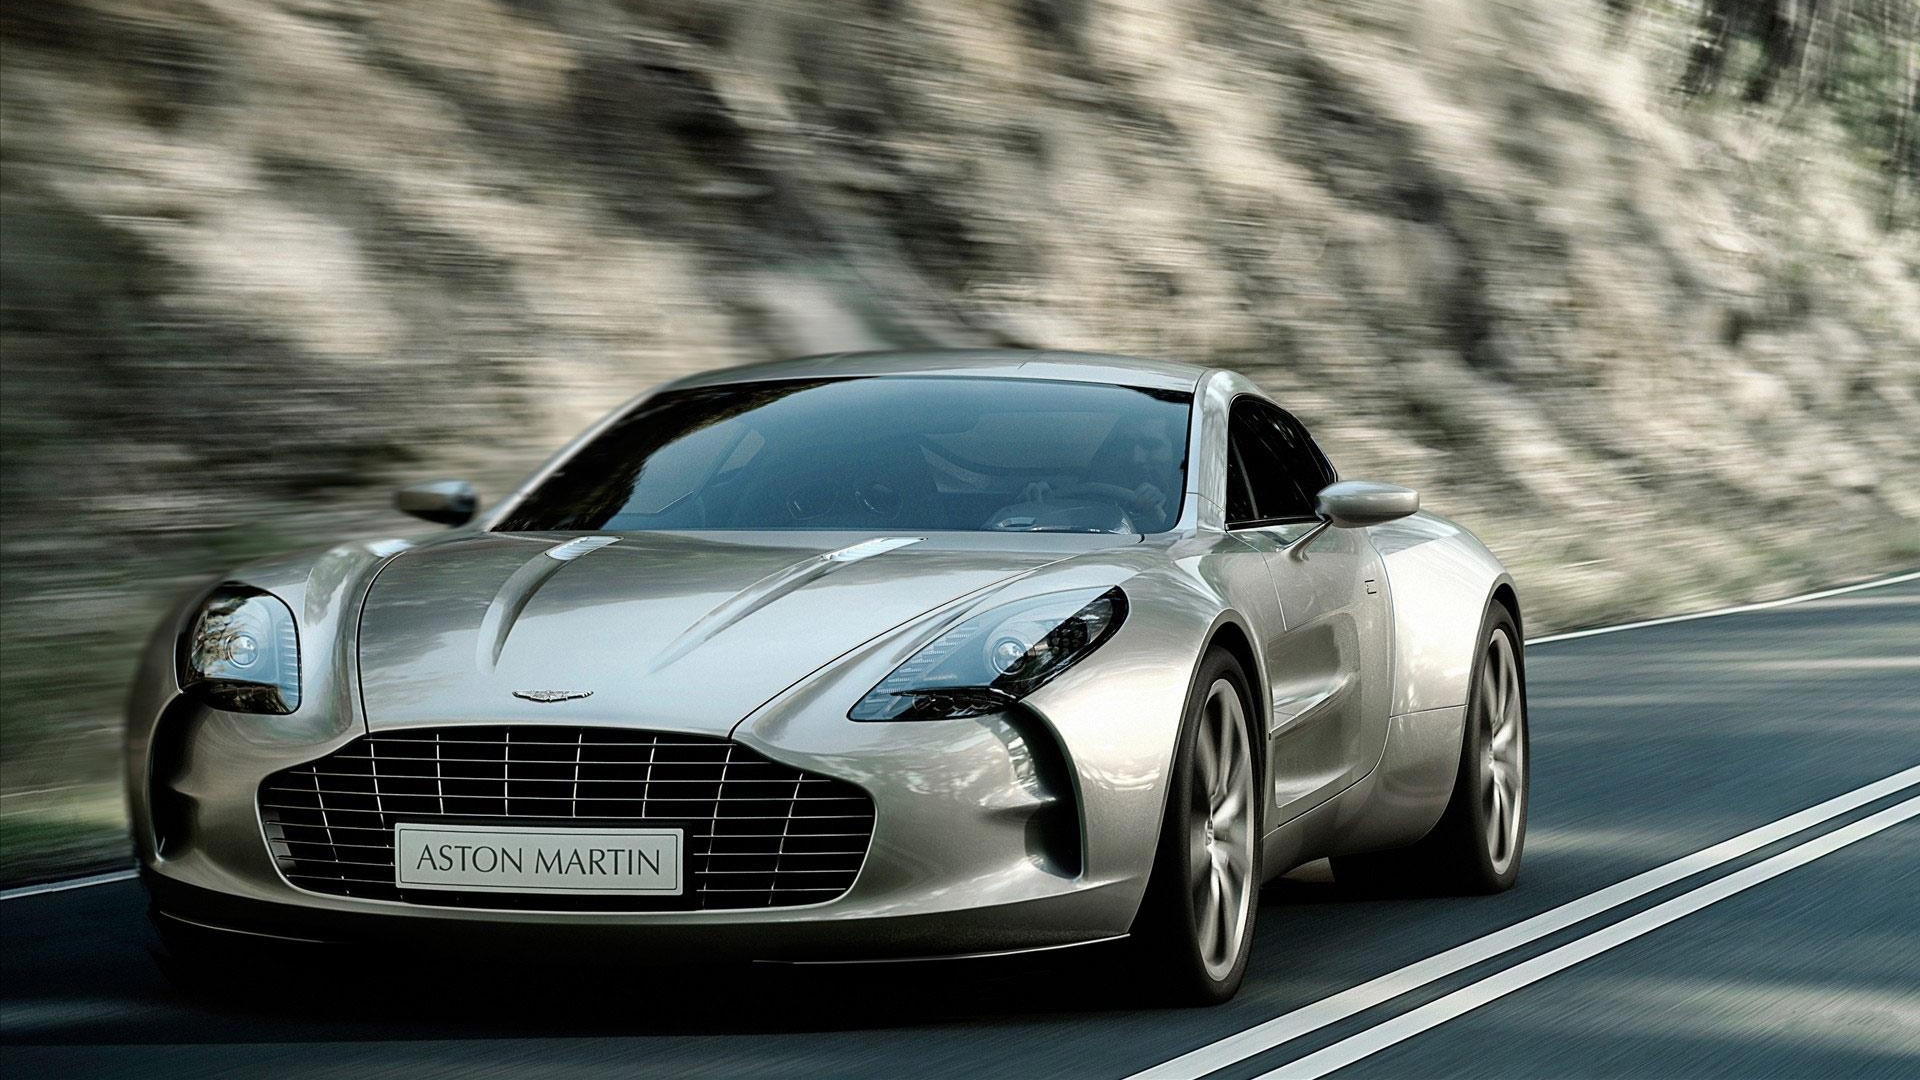 Beautiful Coupe Aston Martin Front for 1920 x 1080 HDTV 1080p resolution